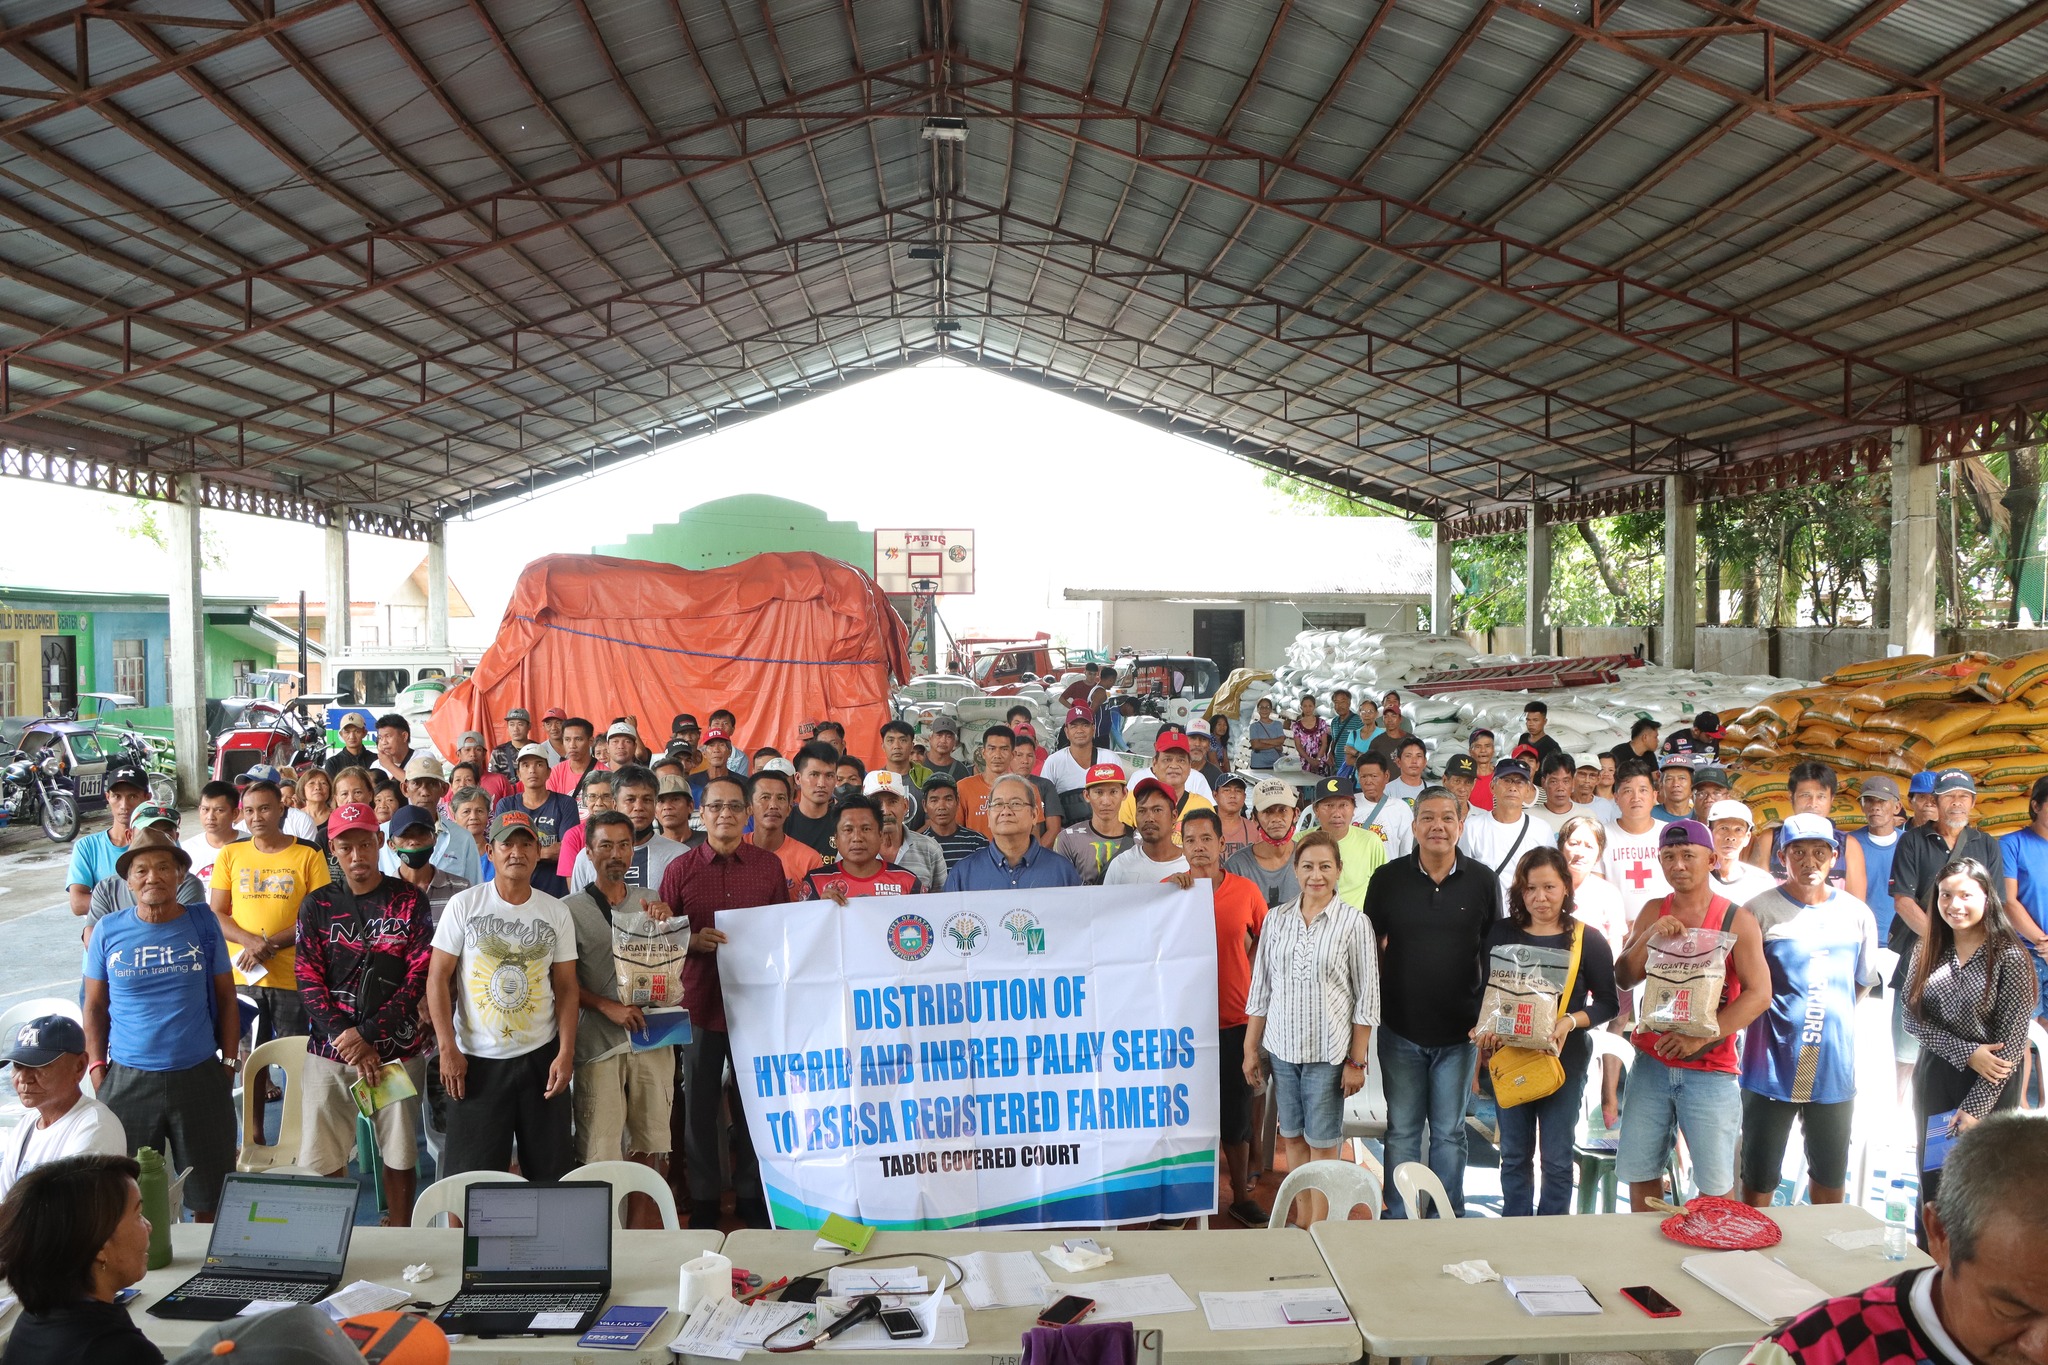 HYBRID AND INBRED PALAY SEED DISTRIBUTION: A COLLABORATIVE EFFORT FROM DA, PHILRICE, AND THE CITY GOVERNMENT OF BATAC